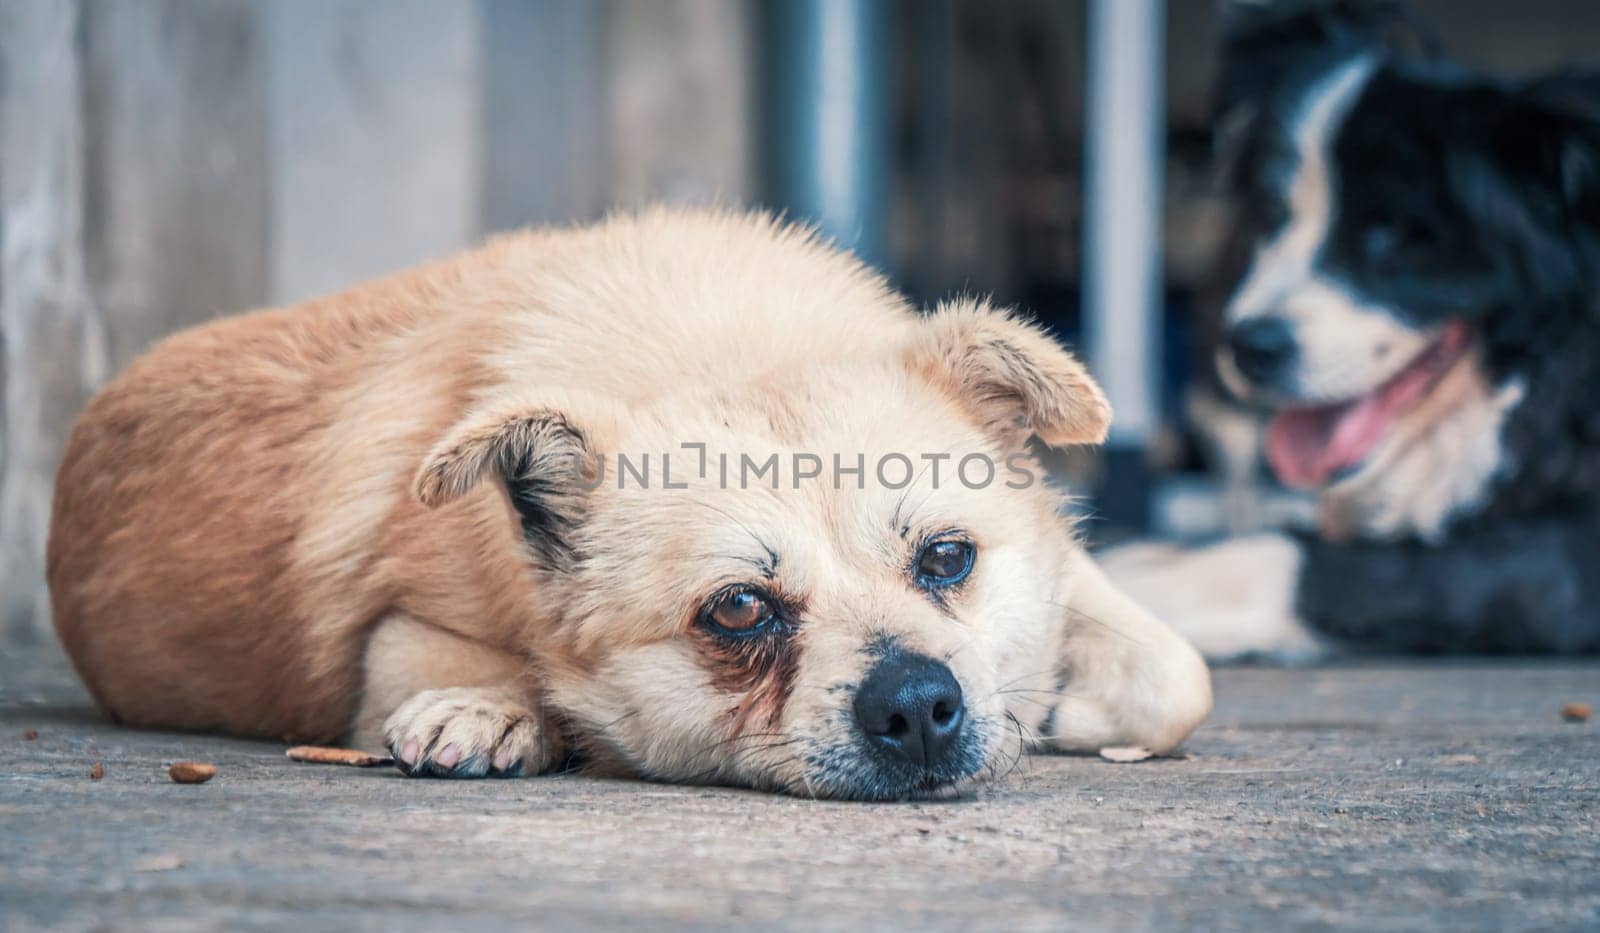 Sad dog in shelter waiting to be rescued and adopted to new home. Shelter for animals concept by Busker